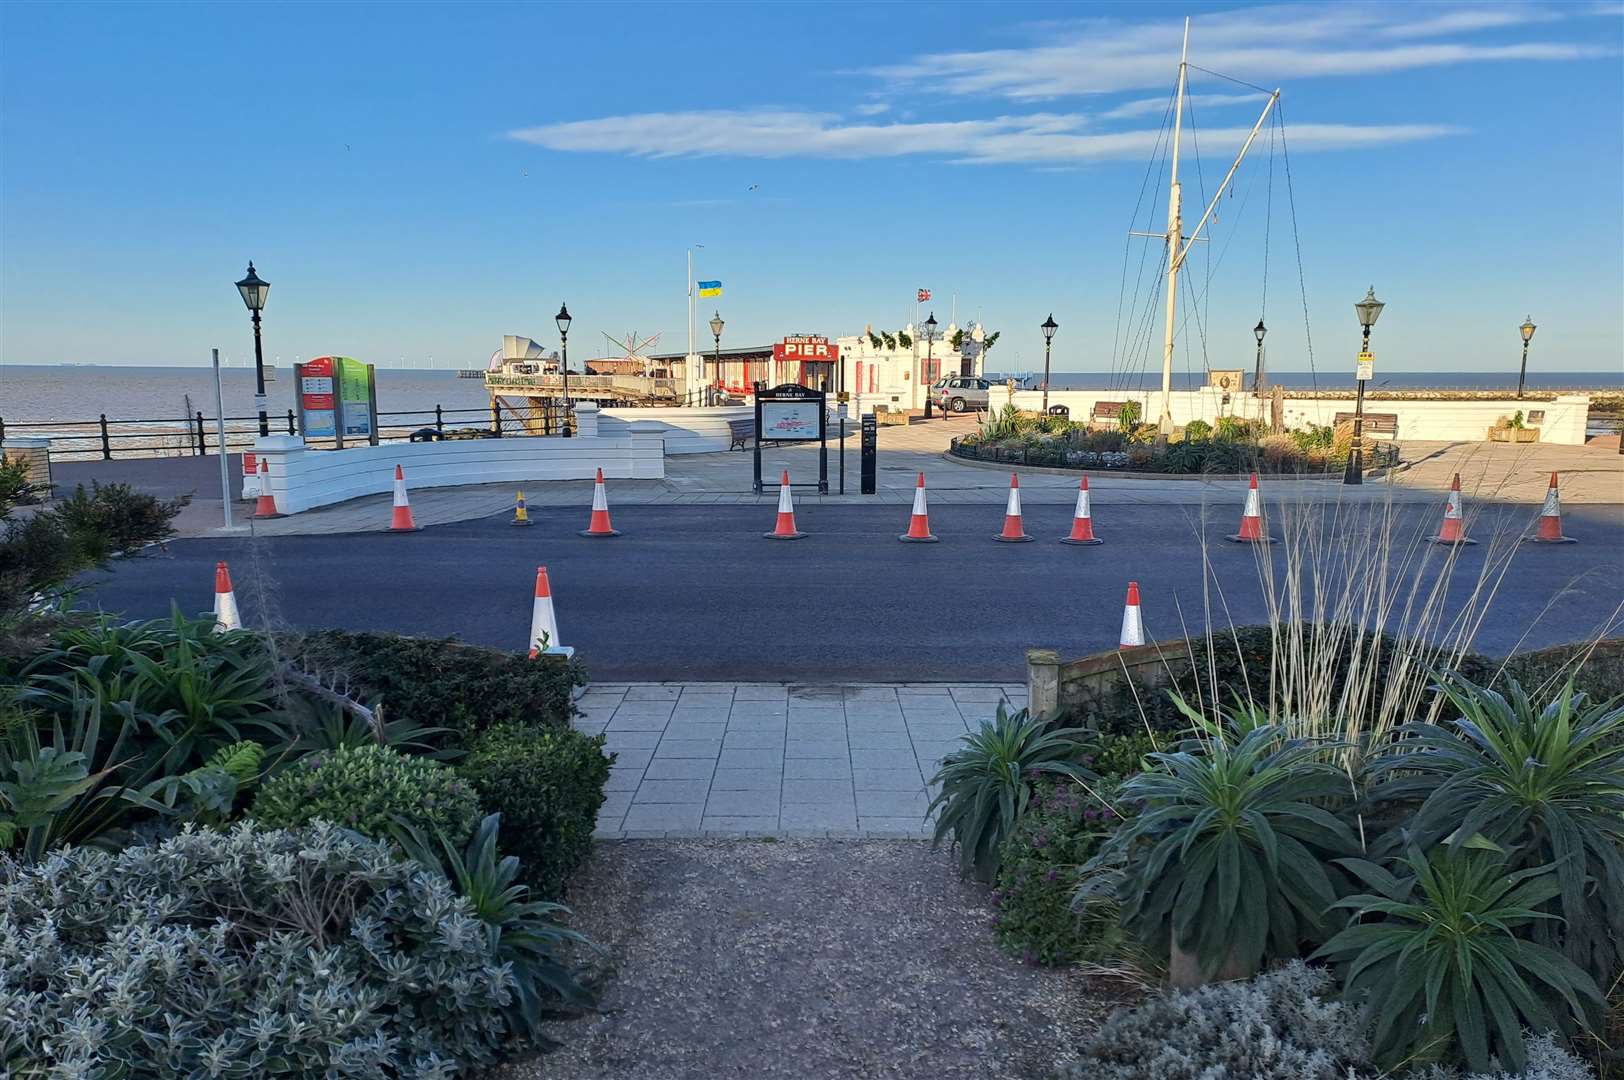 Events will be held on the new square opposite Herne Bay Pier